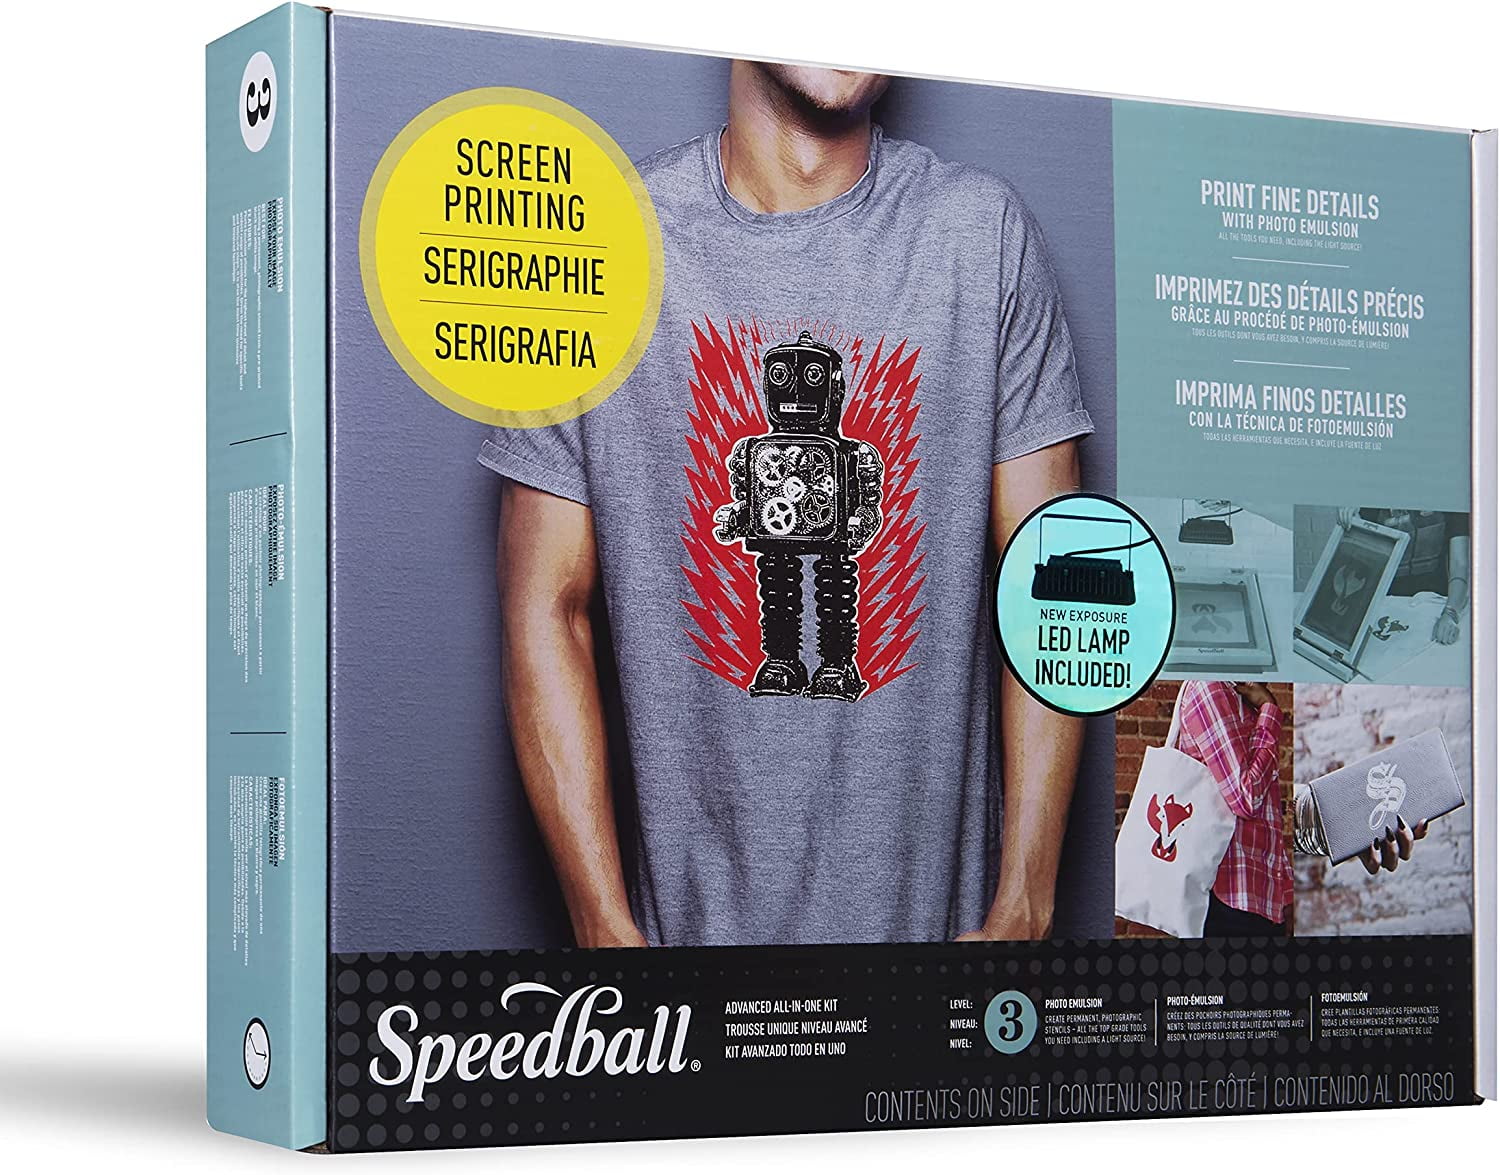 Speedball Advanced All-In-One Screen Printing Kit, Includes 4 inks Black, Red, White, Blue Walmart.com